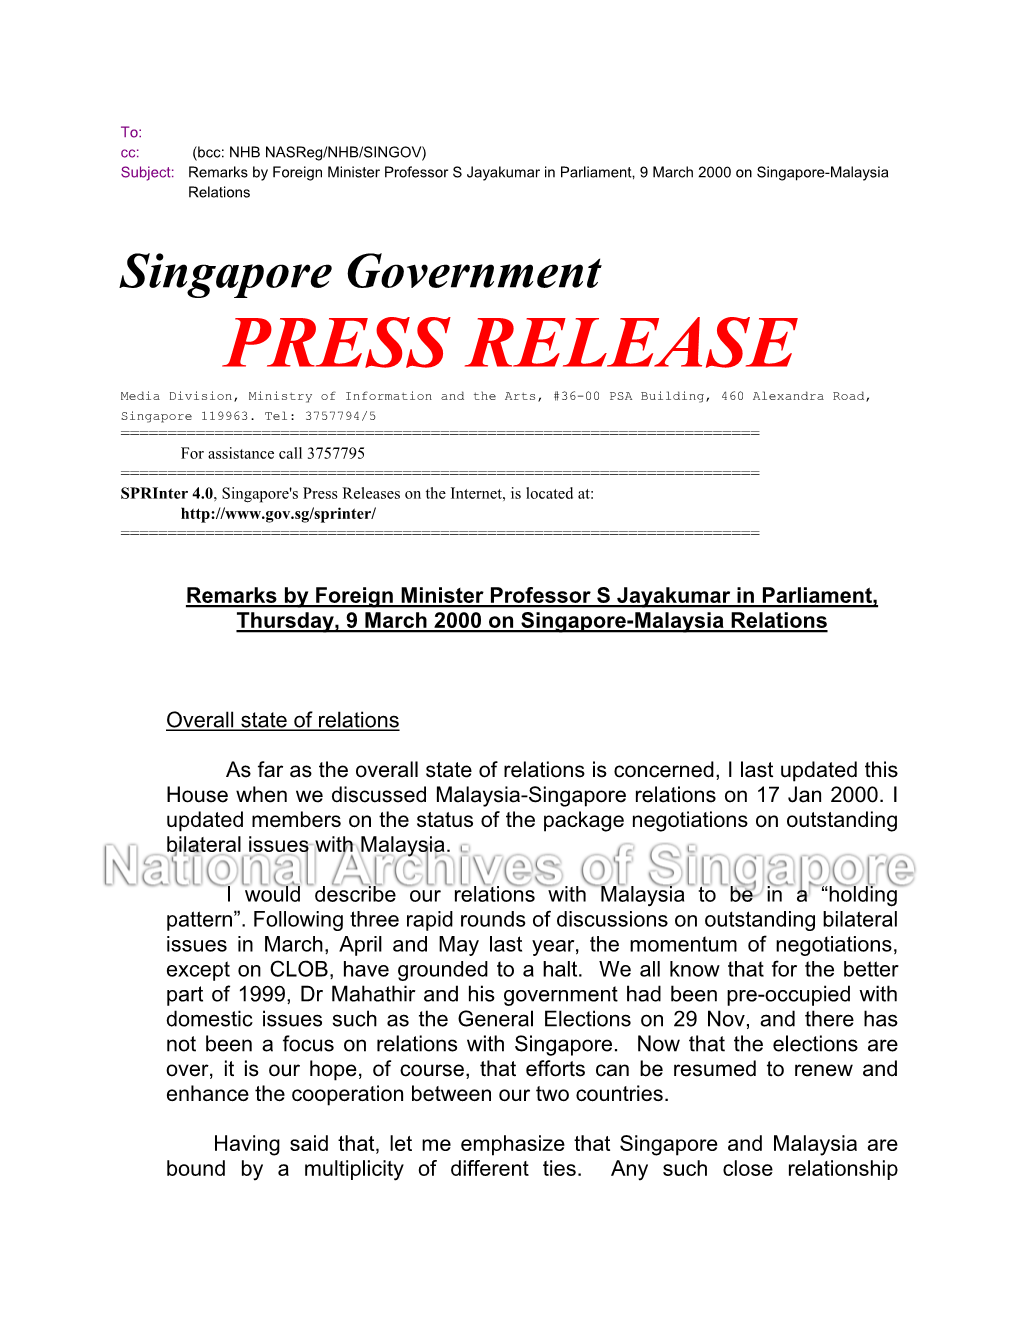 PRESS RELEASE Media Division, Ministry of Information and the Arts, #36-00 PSA Building, 460 Alexandra Road, Singapore 119963